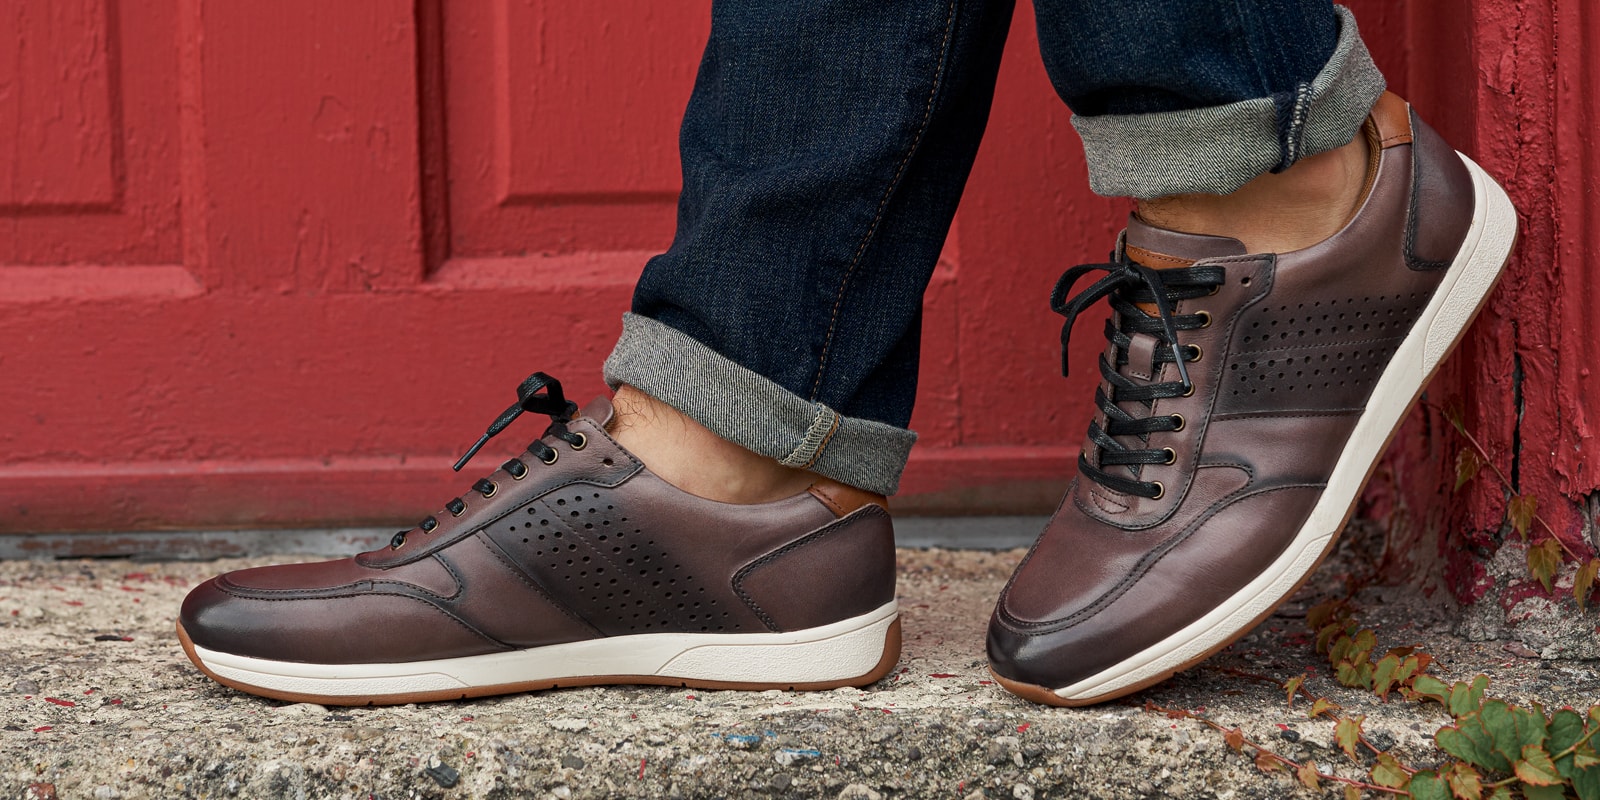 The featured image is the Fusion Sport Lace Up in Gray.